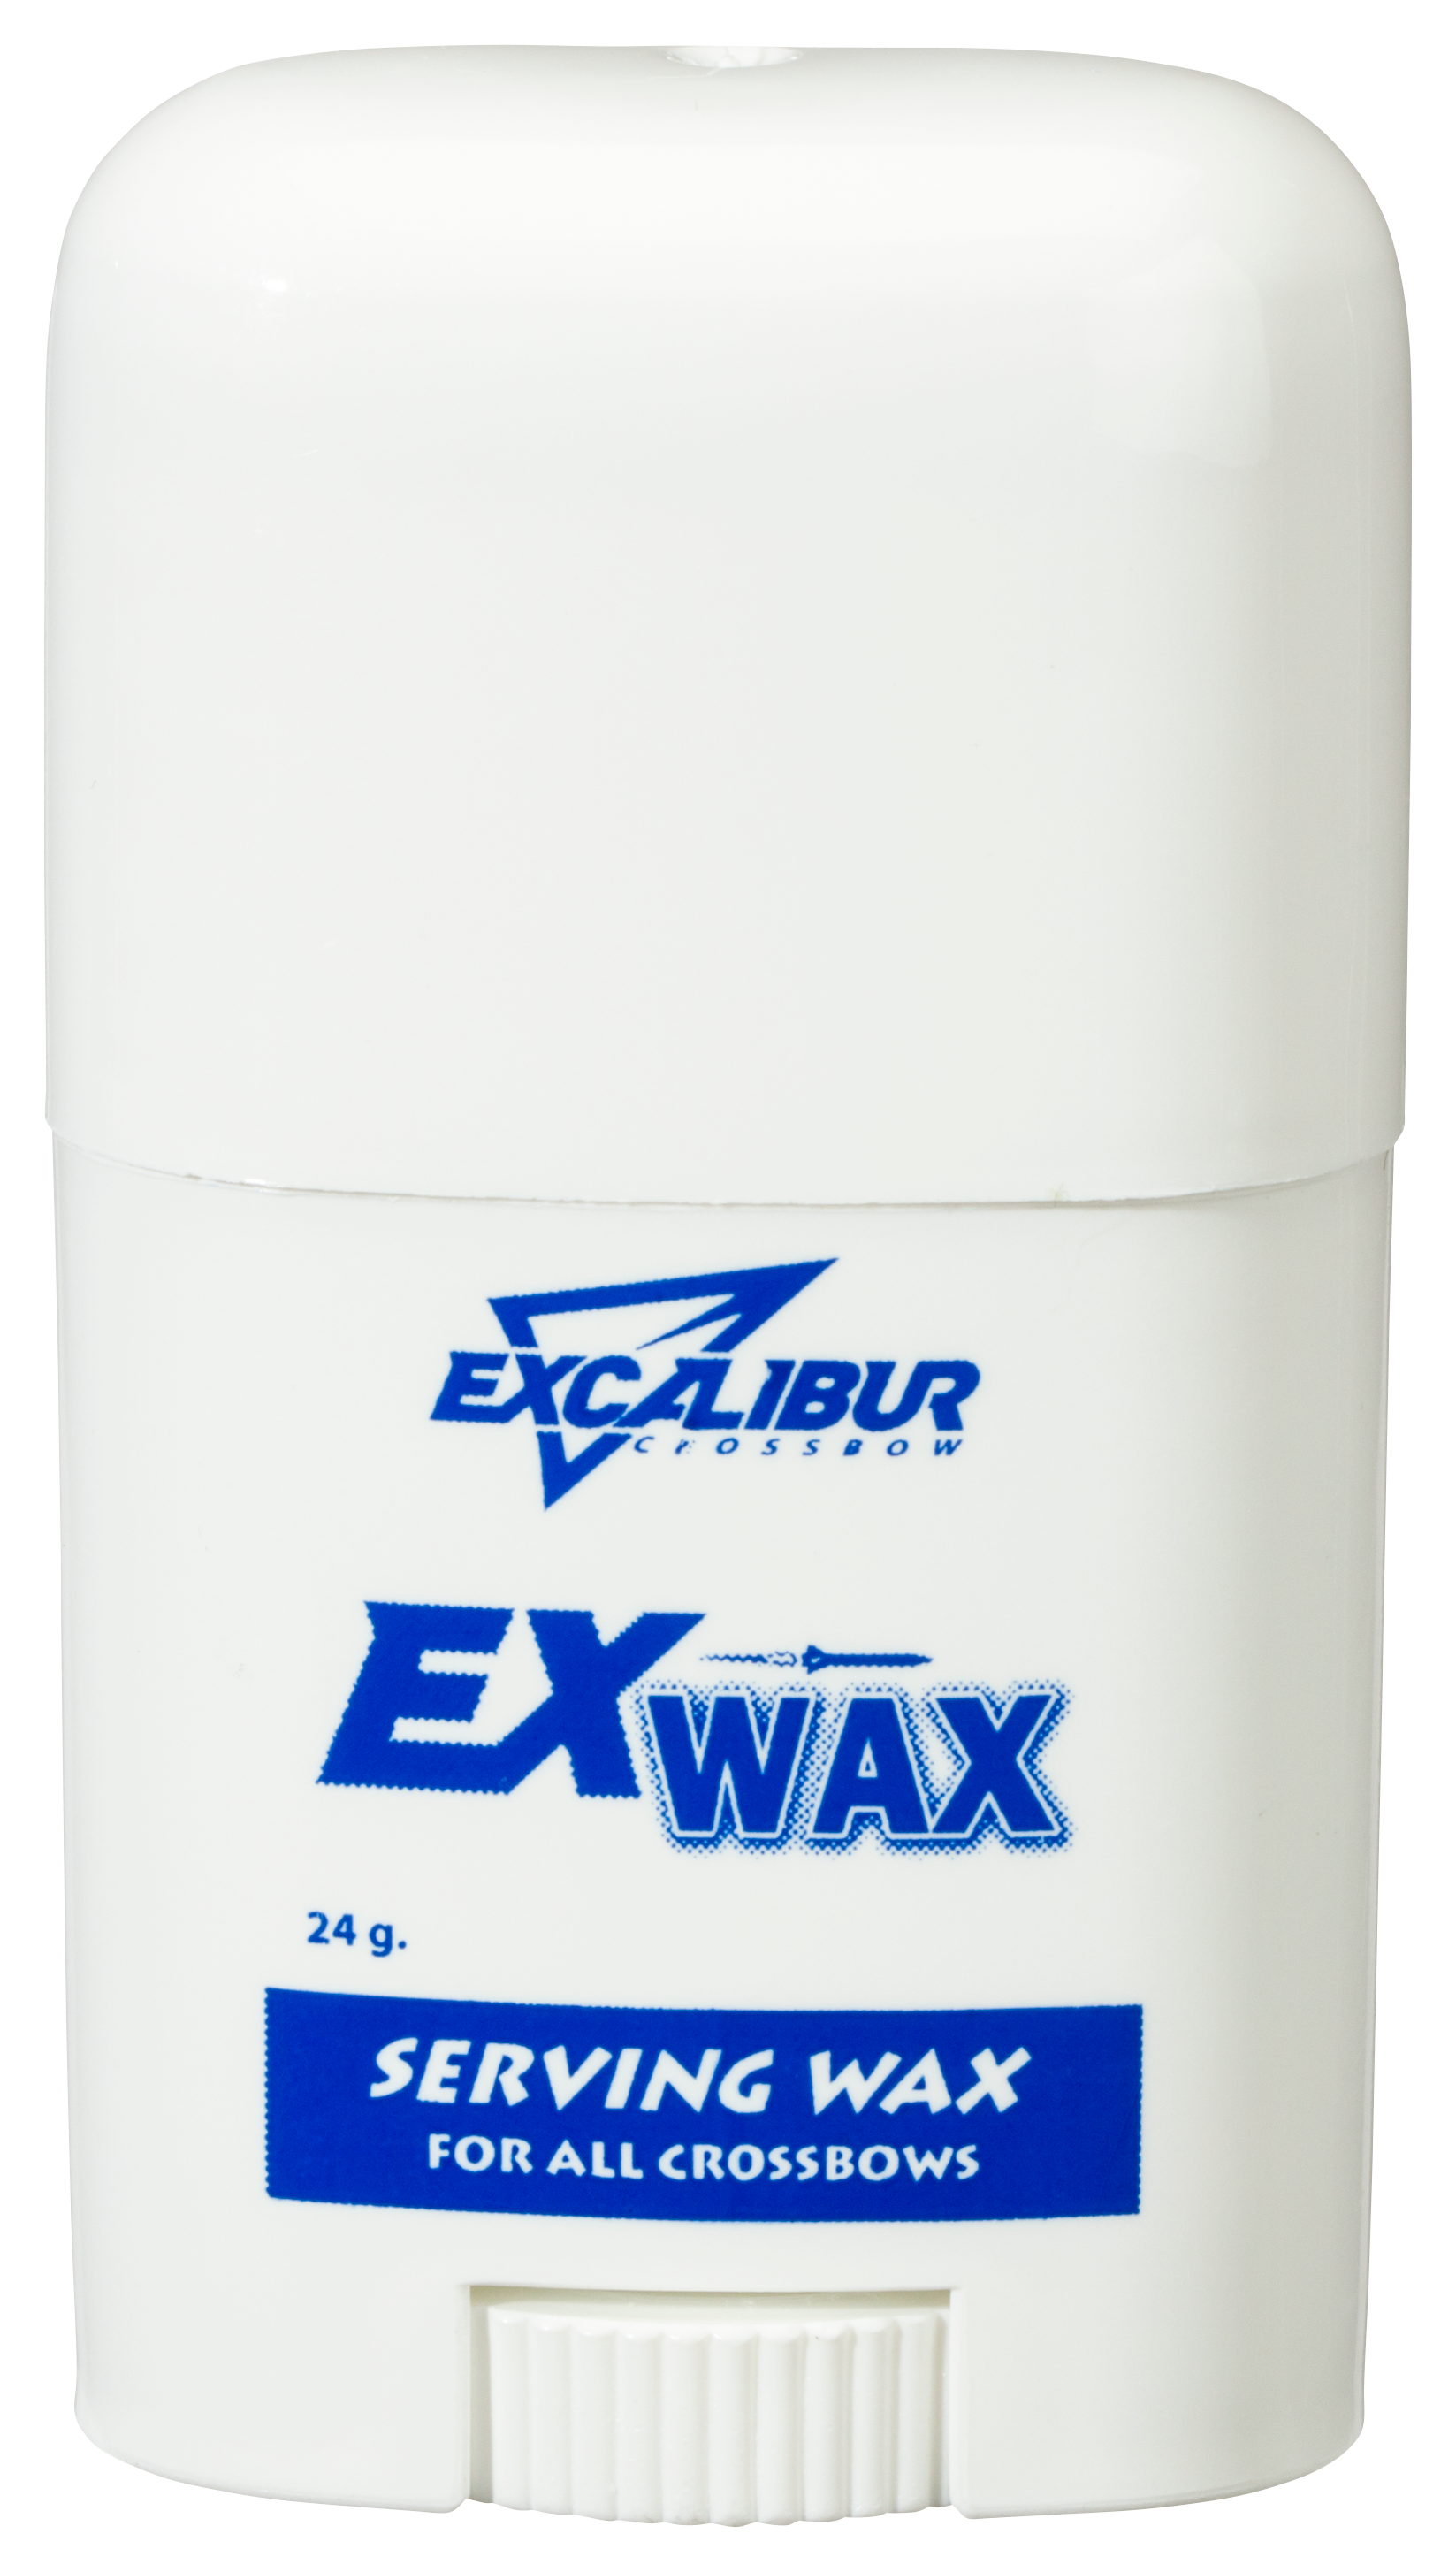 Excalibur Deck and String Wax for Crossbows